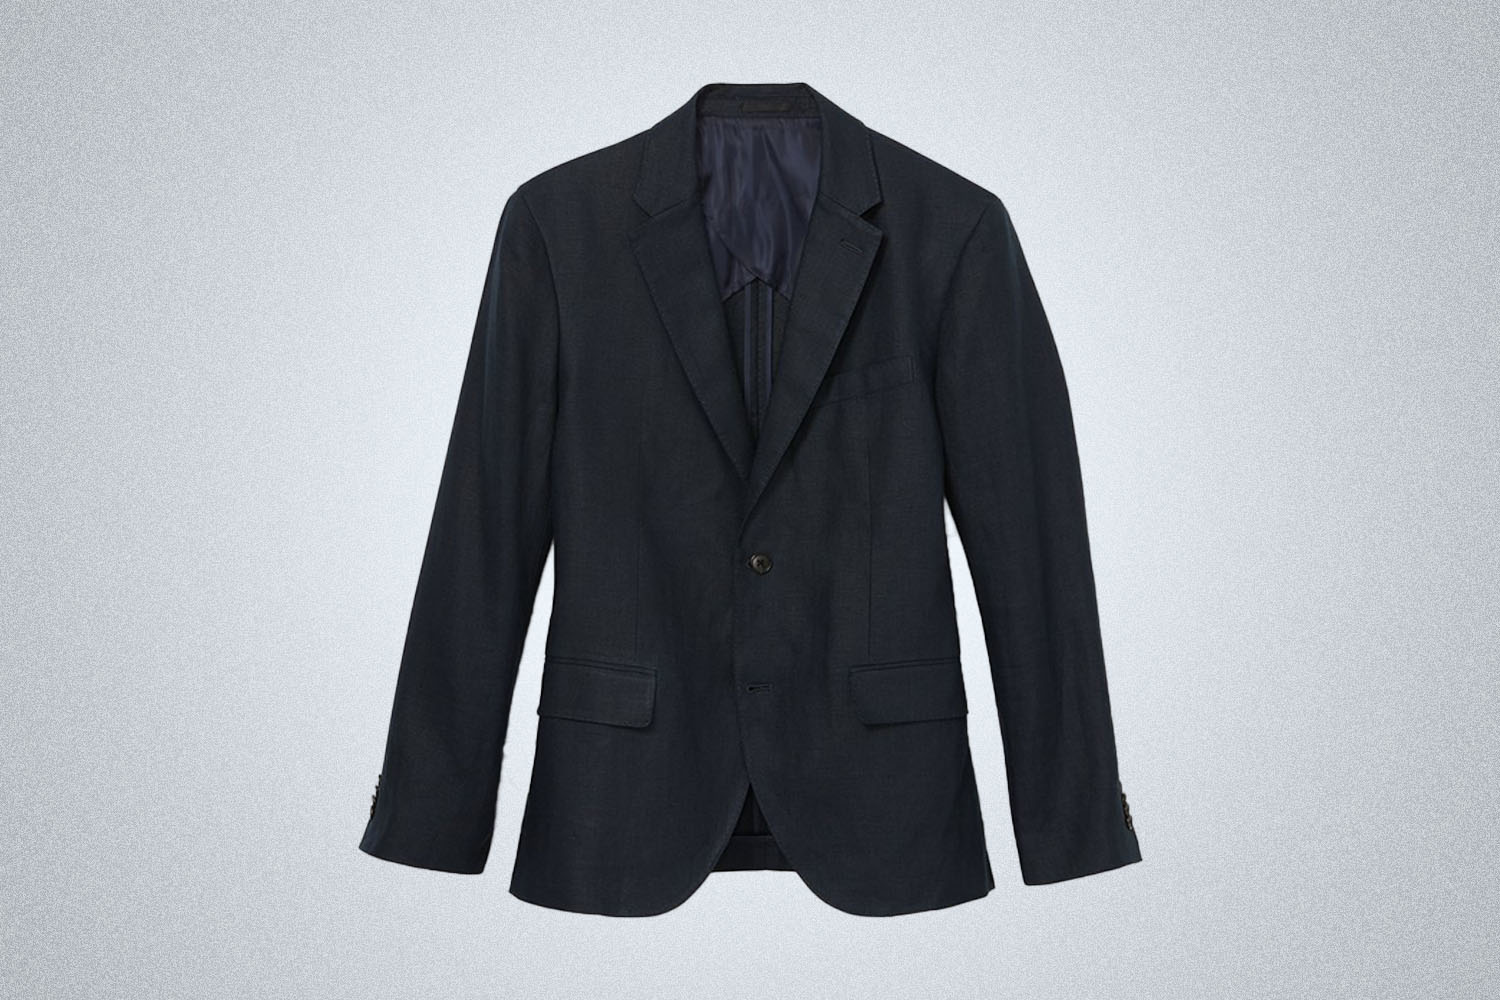 a pair of blue linen blazer from Club Monaco on a grey background